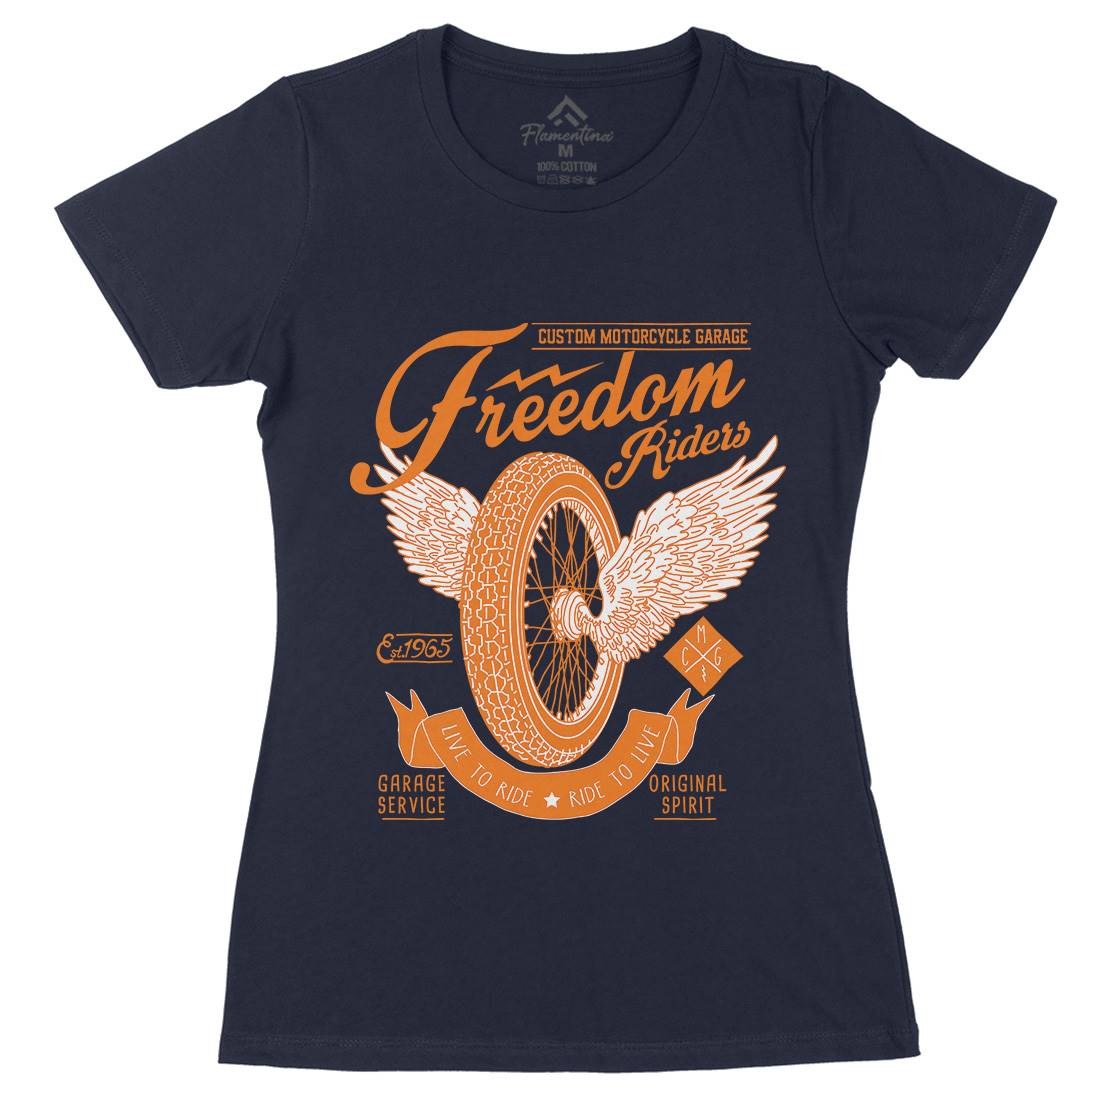 Freedom Riders Womens Organic Crew Neck T-Shirt Motorcycles A989